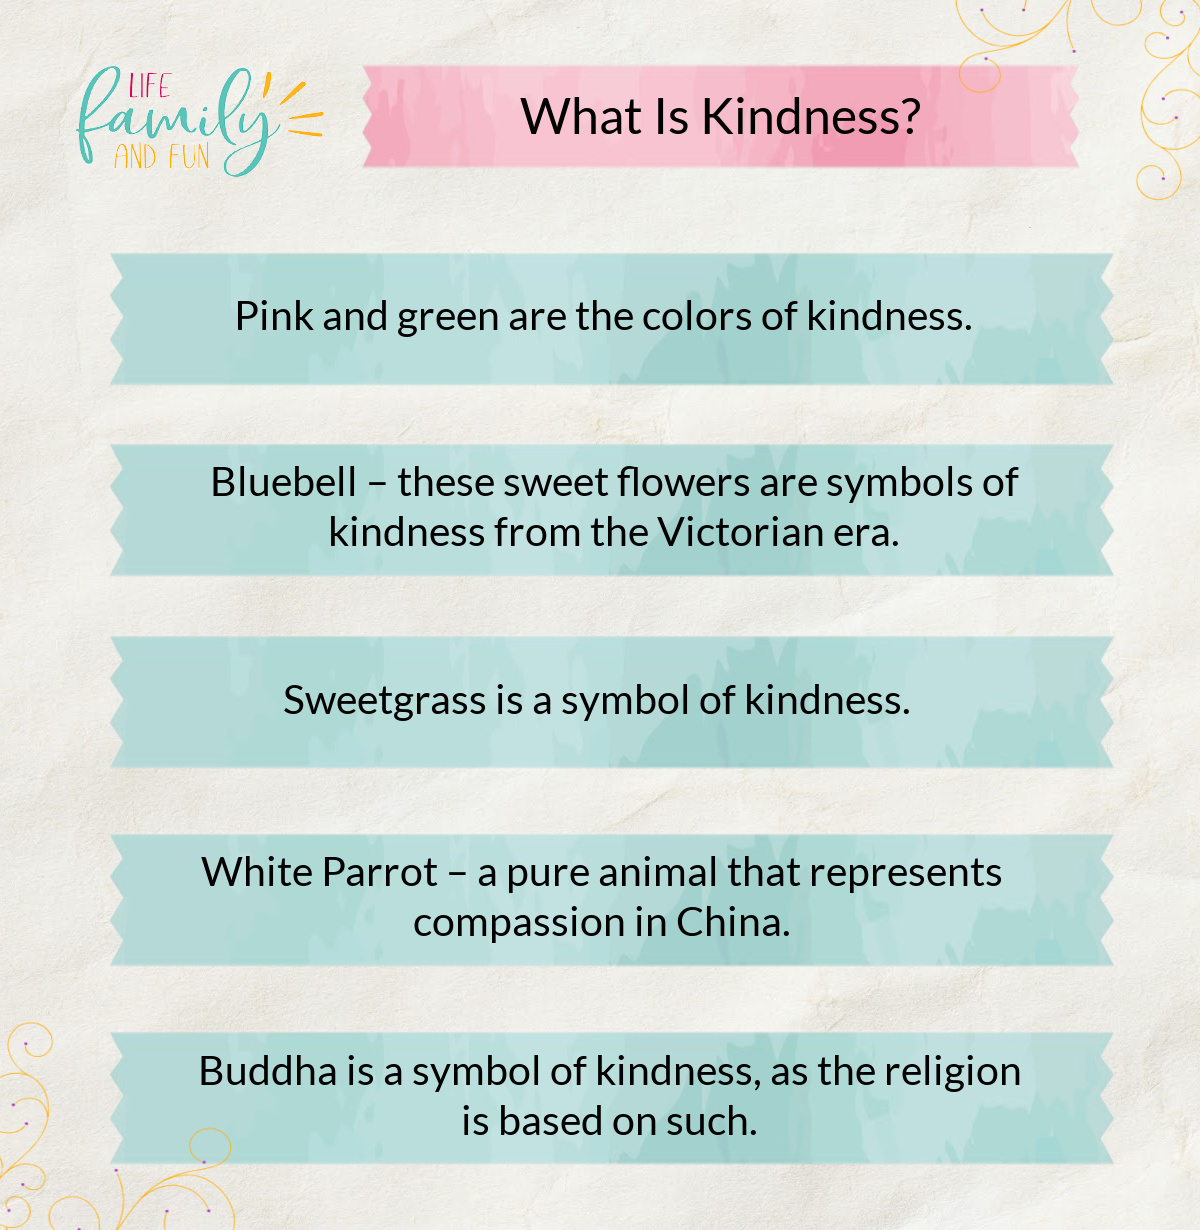 What Is Kindness?